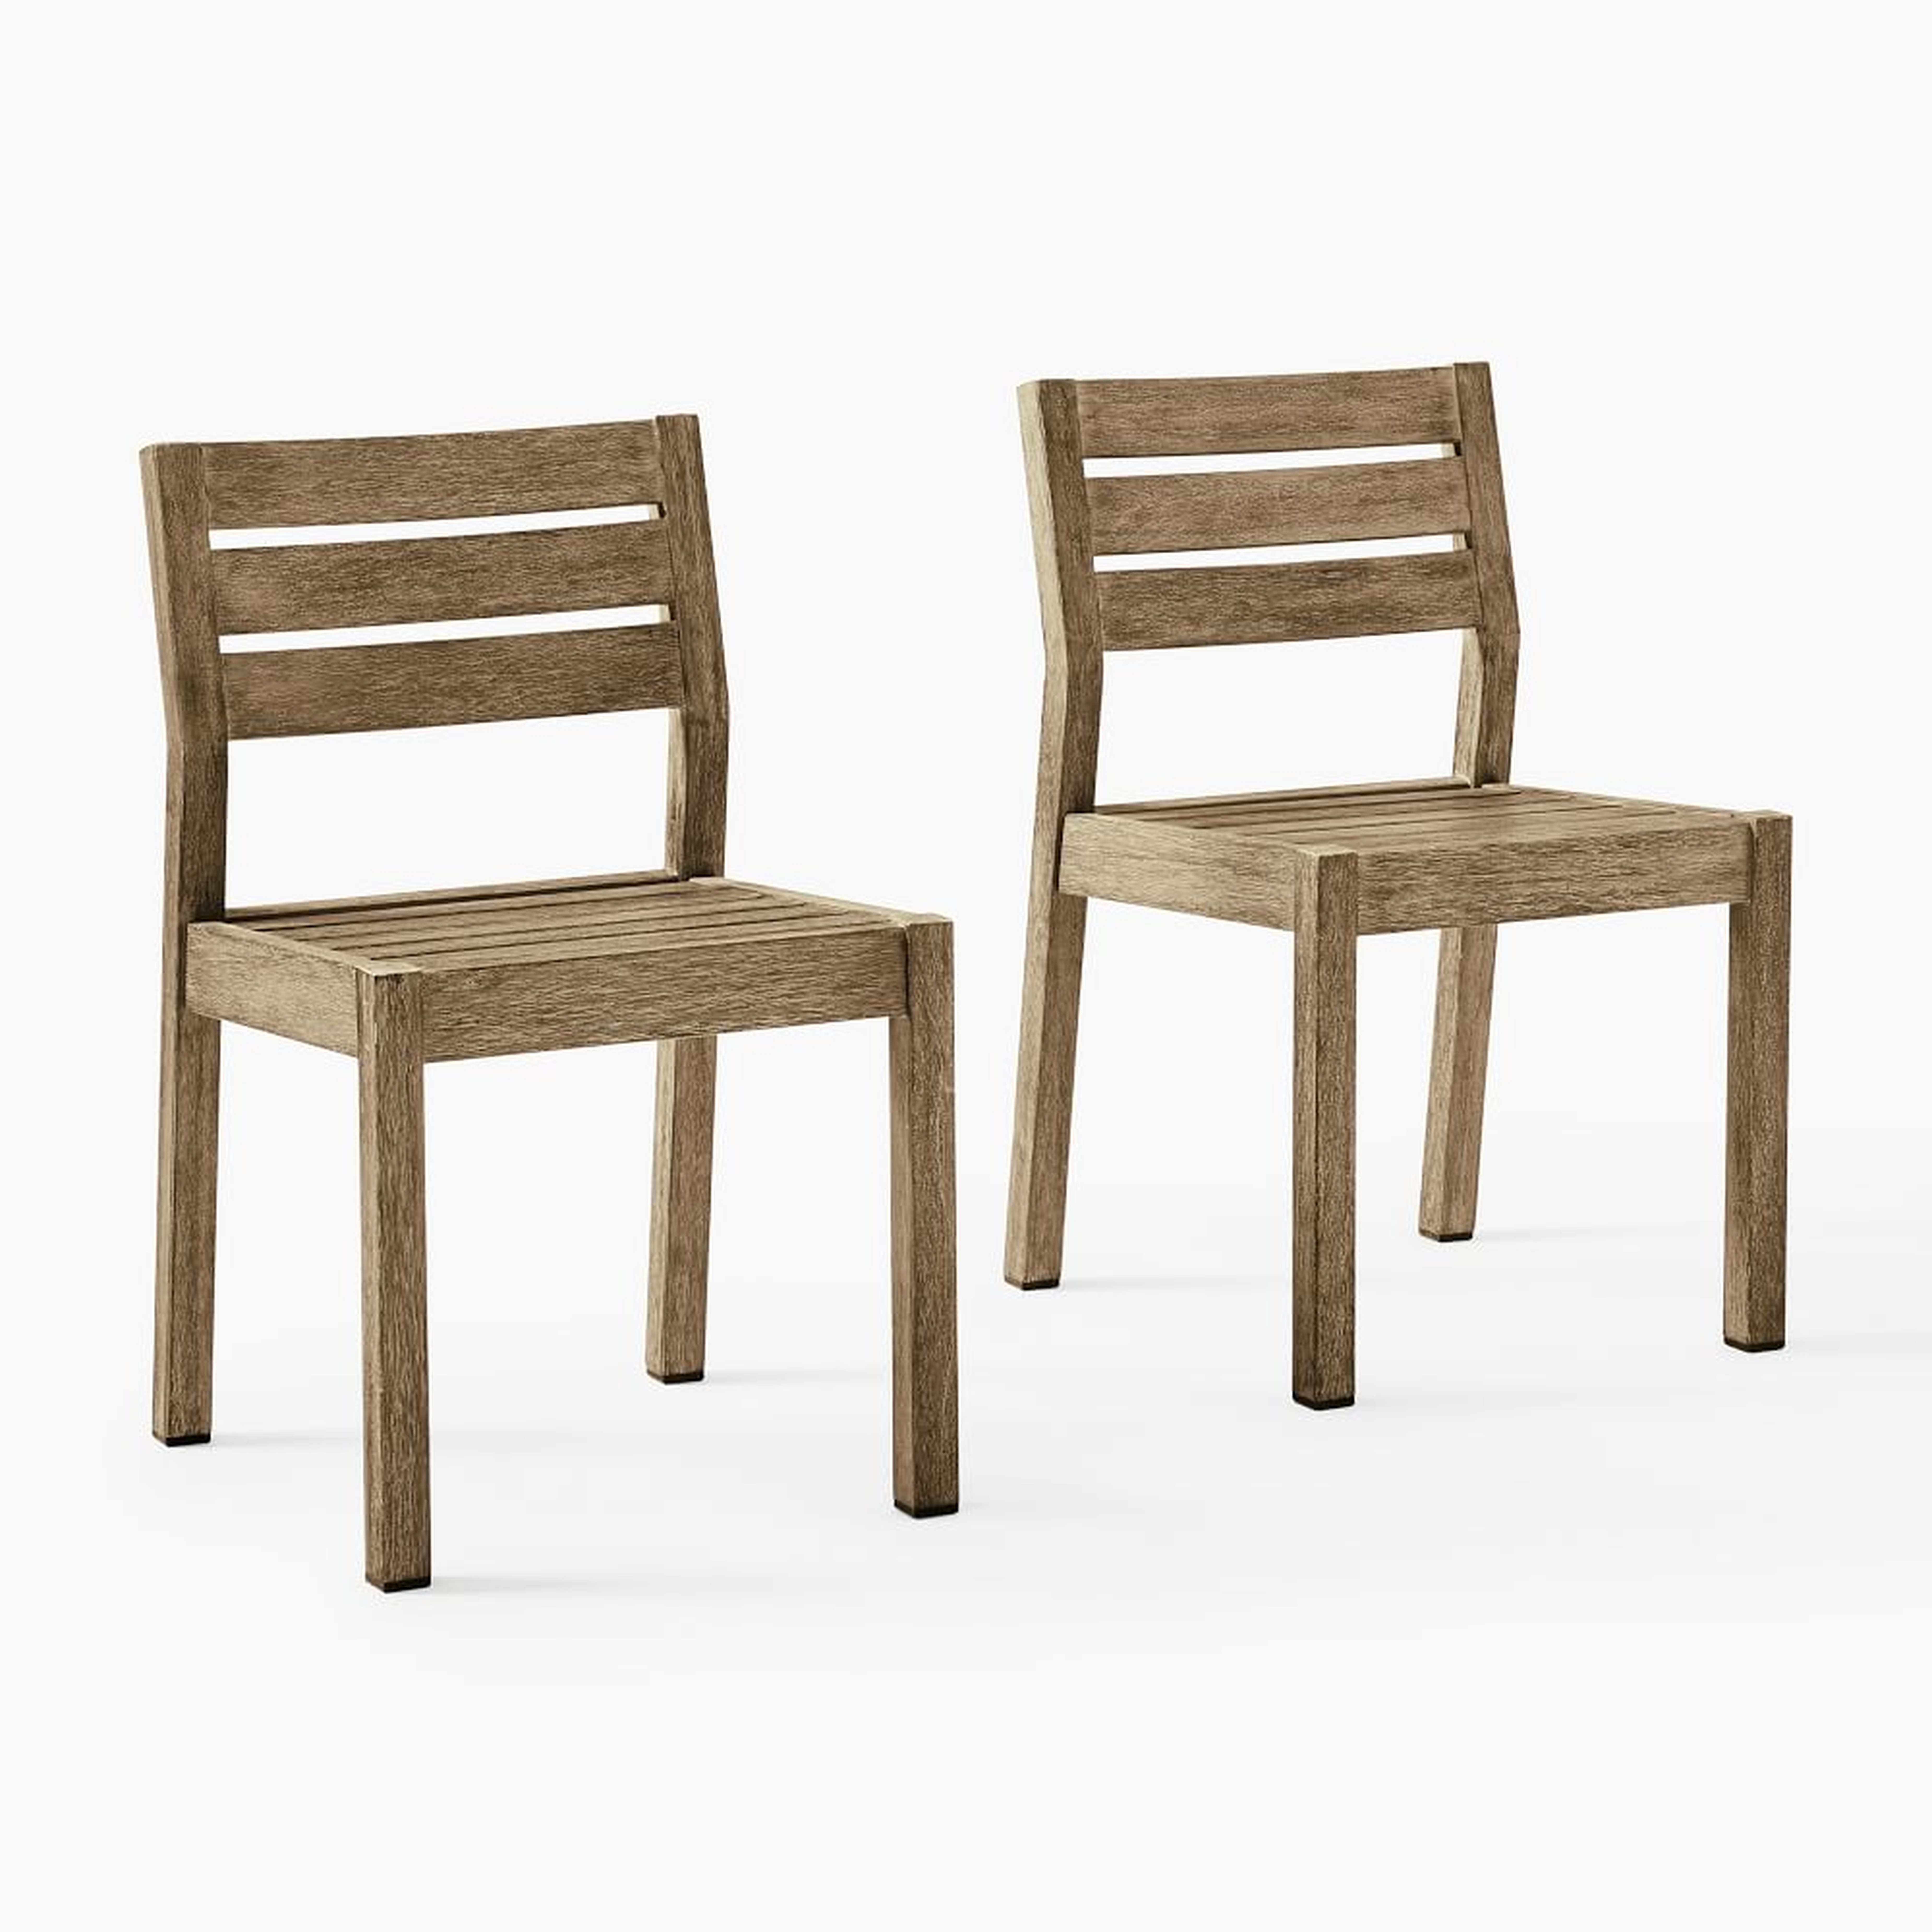 Portside Outdoor Dining Chair, Driftwood, Set of 2 - West Elm